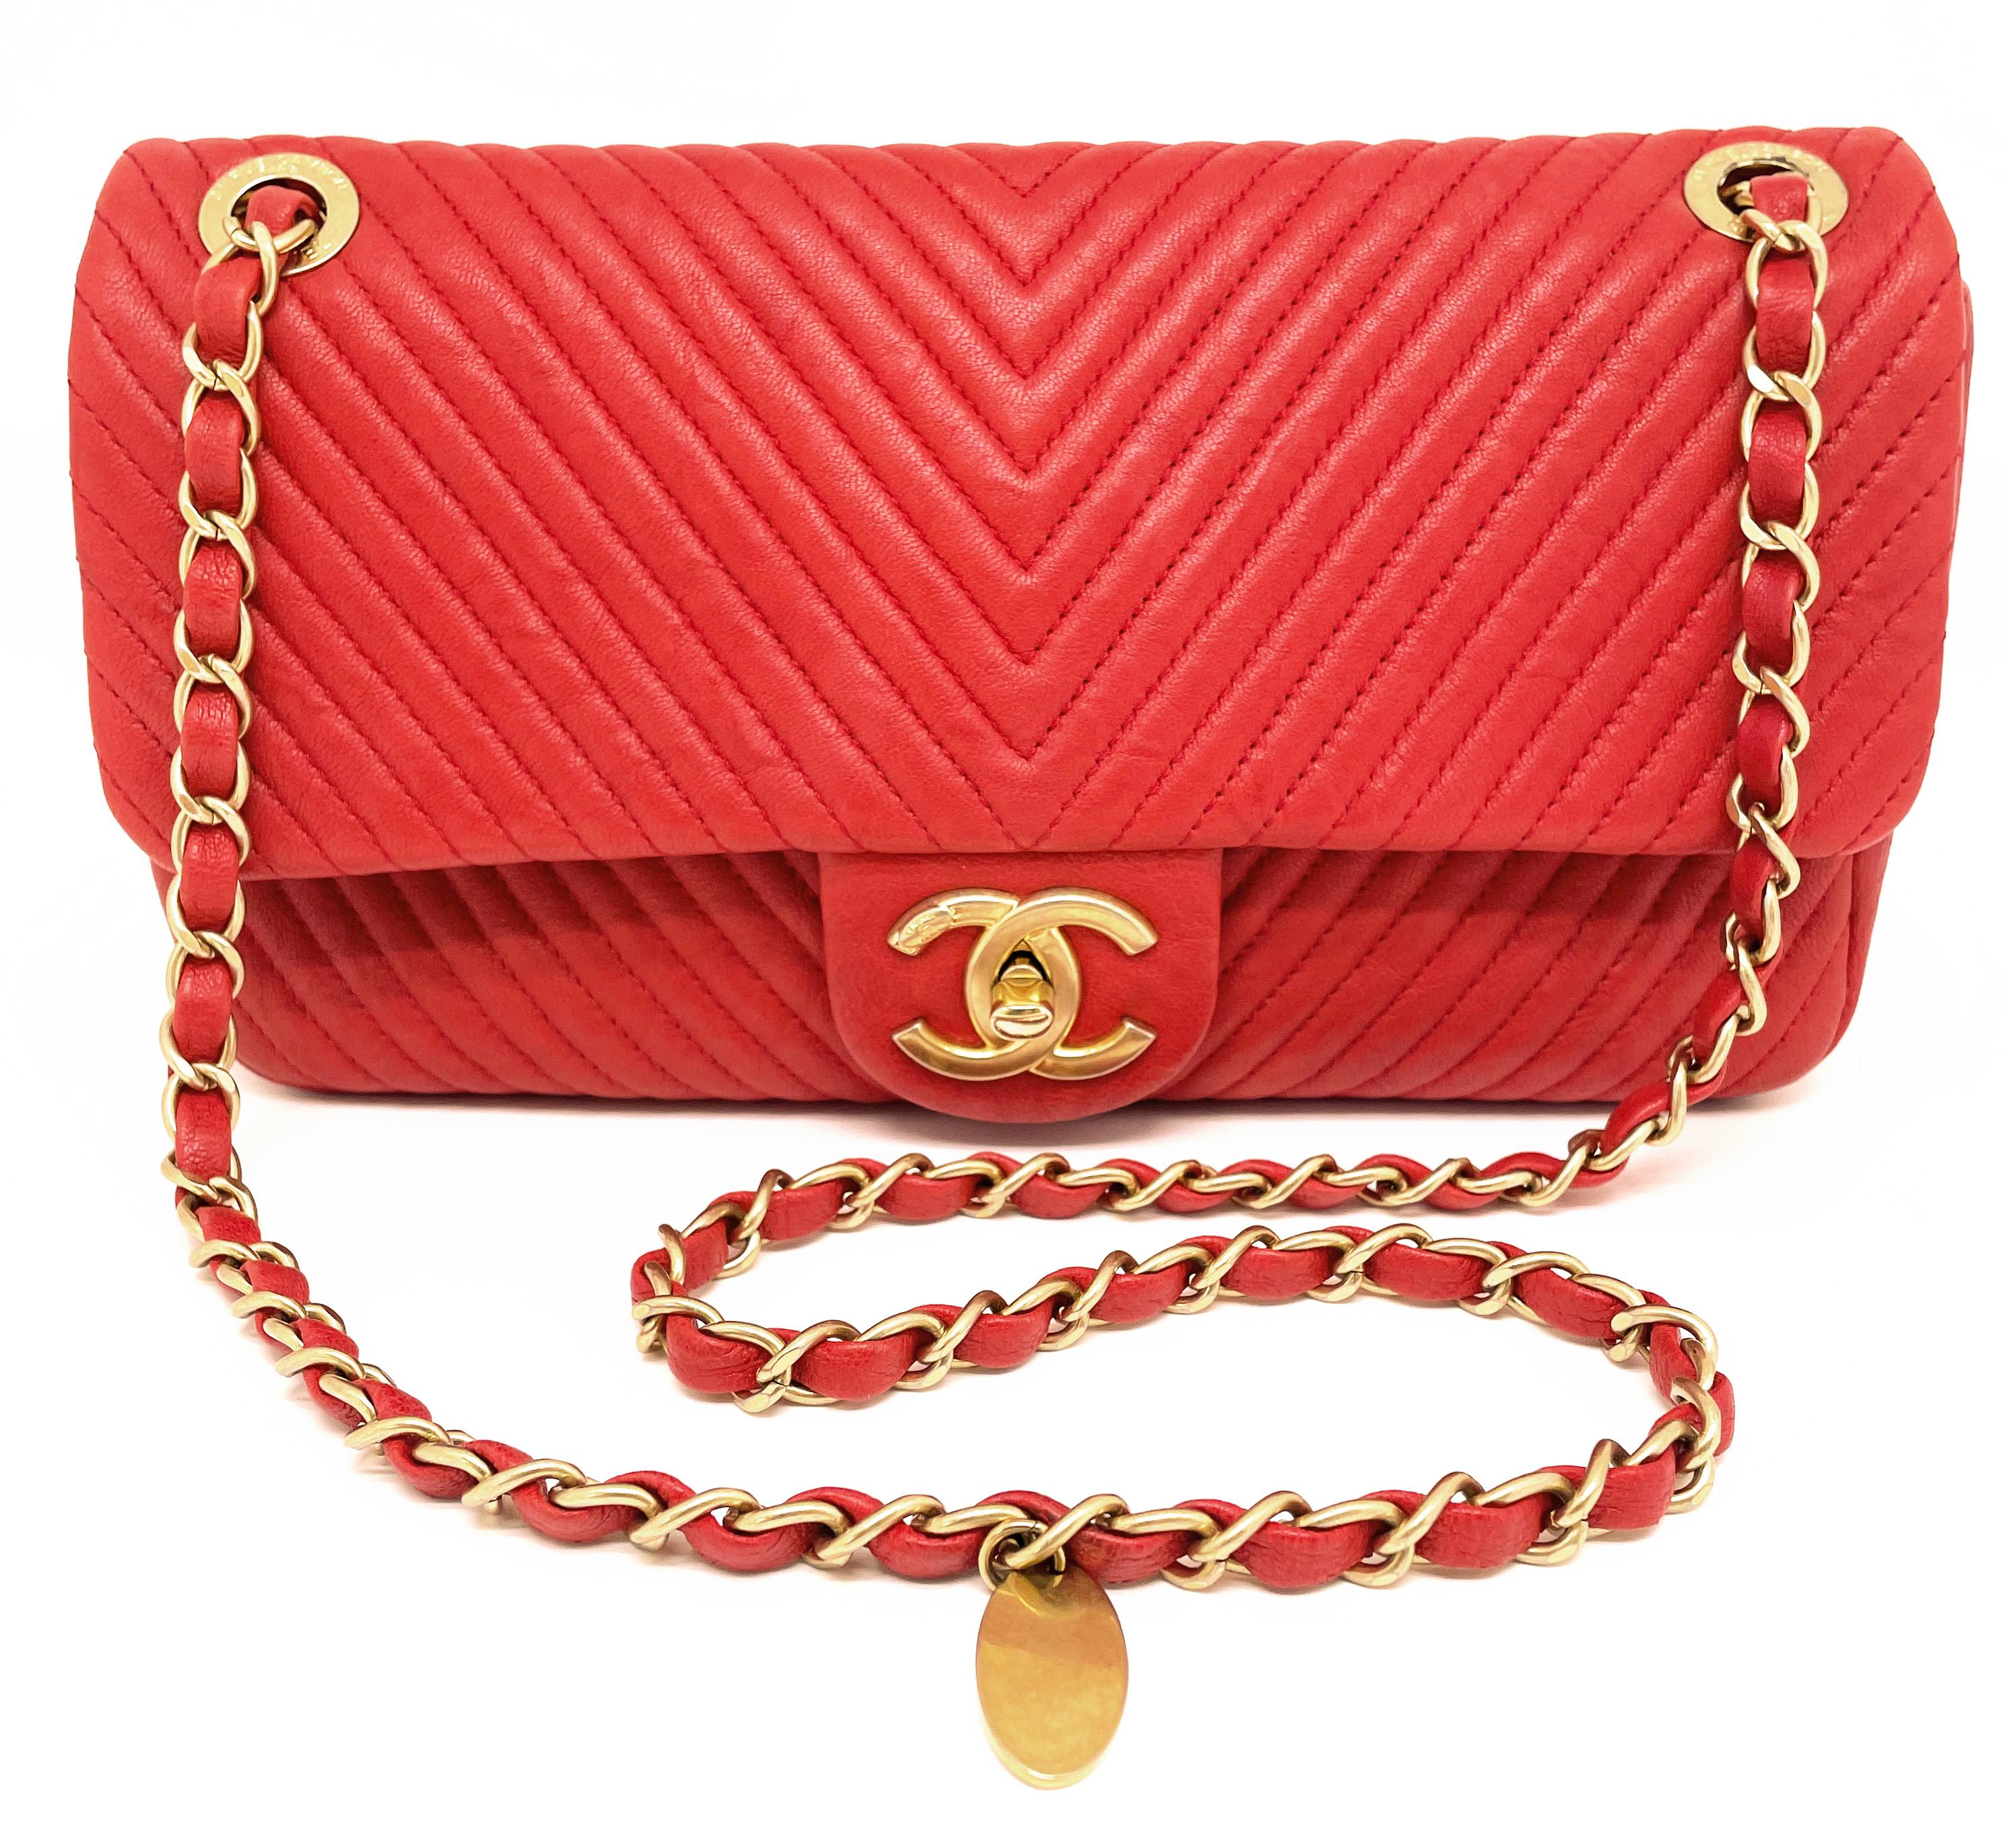 Superb Chanel 27 cm bag in leather and Valentine Red Chevron pattern For Sale 2